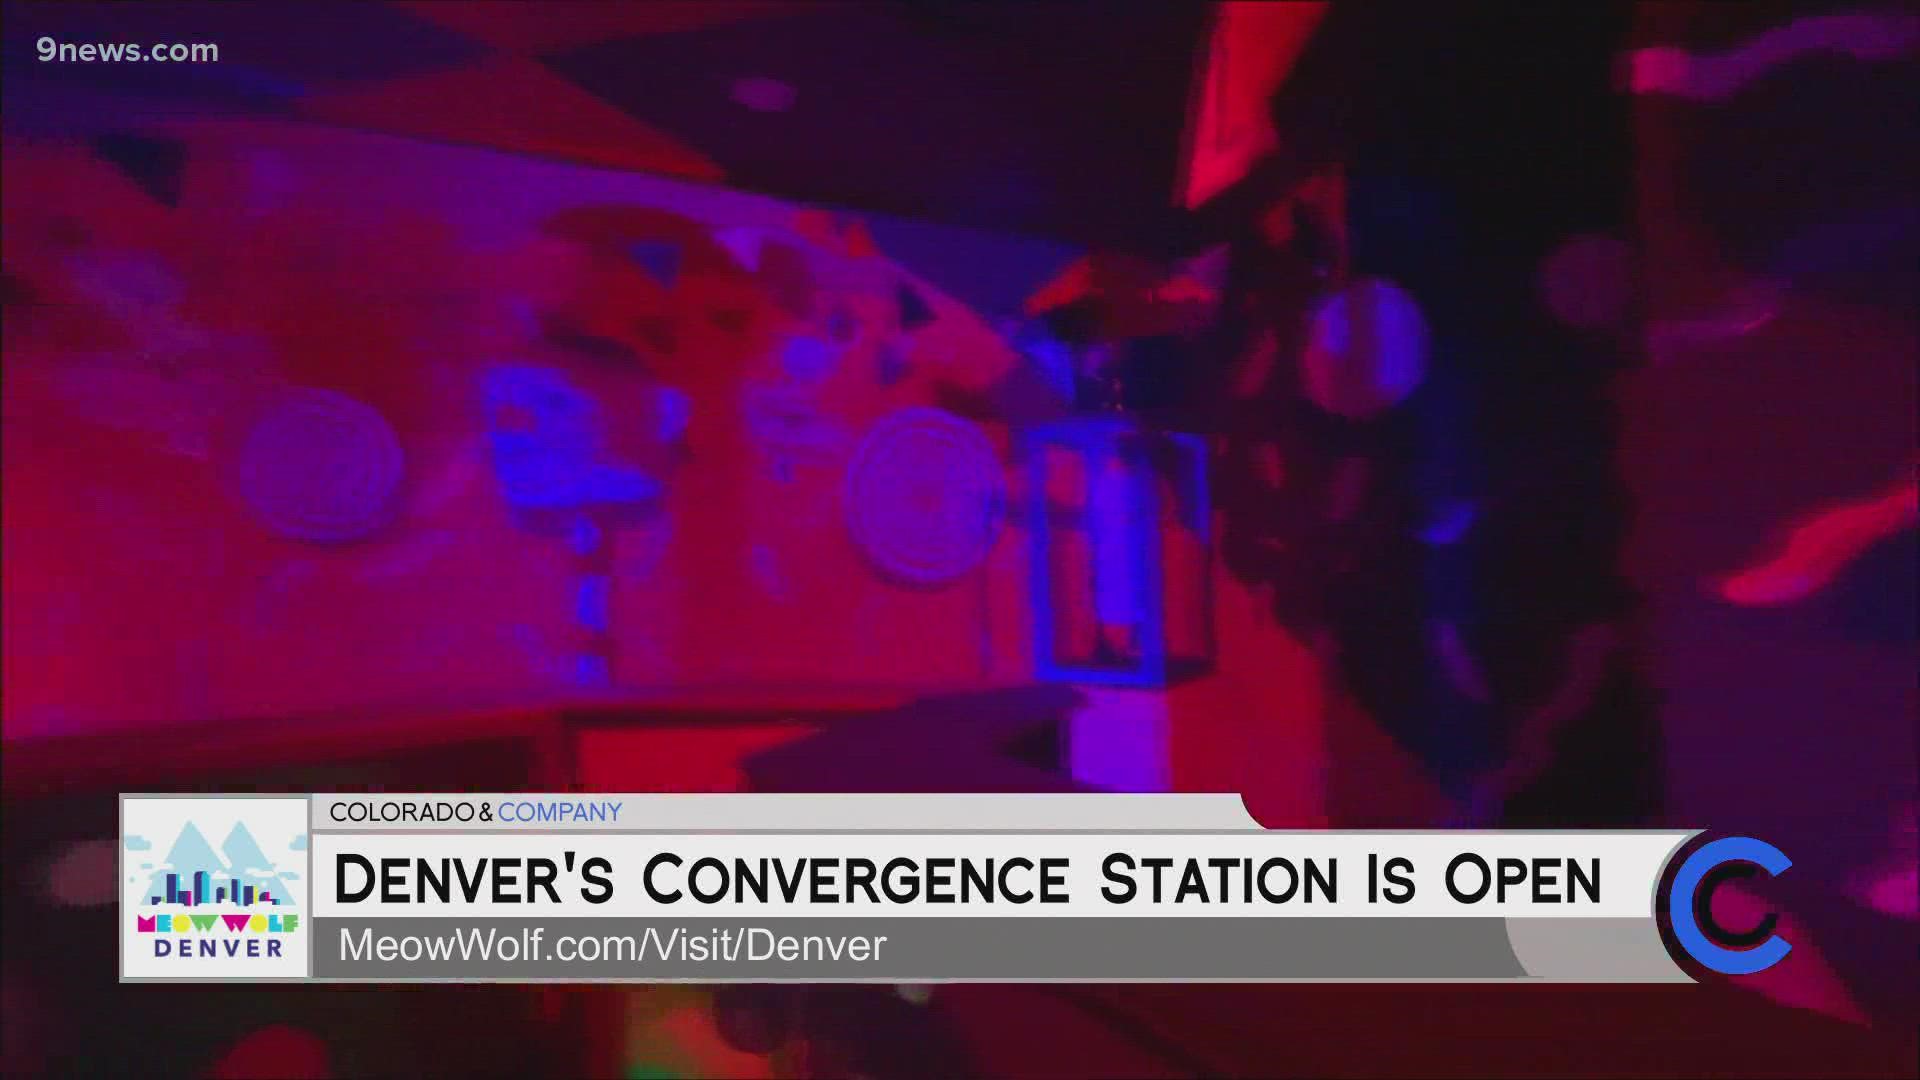 Get your ticket to Meow Wolf Convergence Station online at MeowWolf.com/visit/Denver.